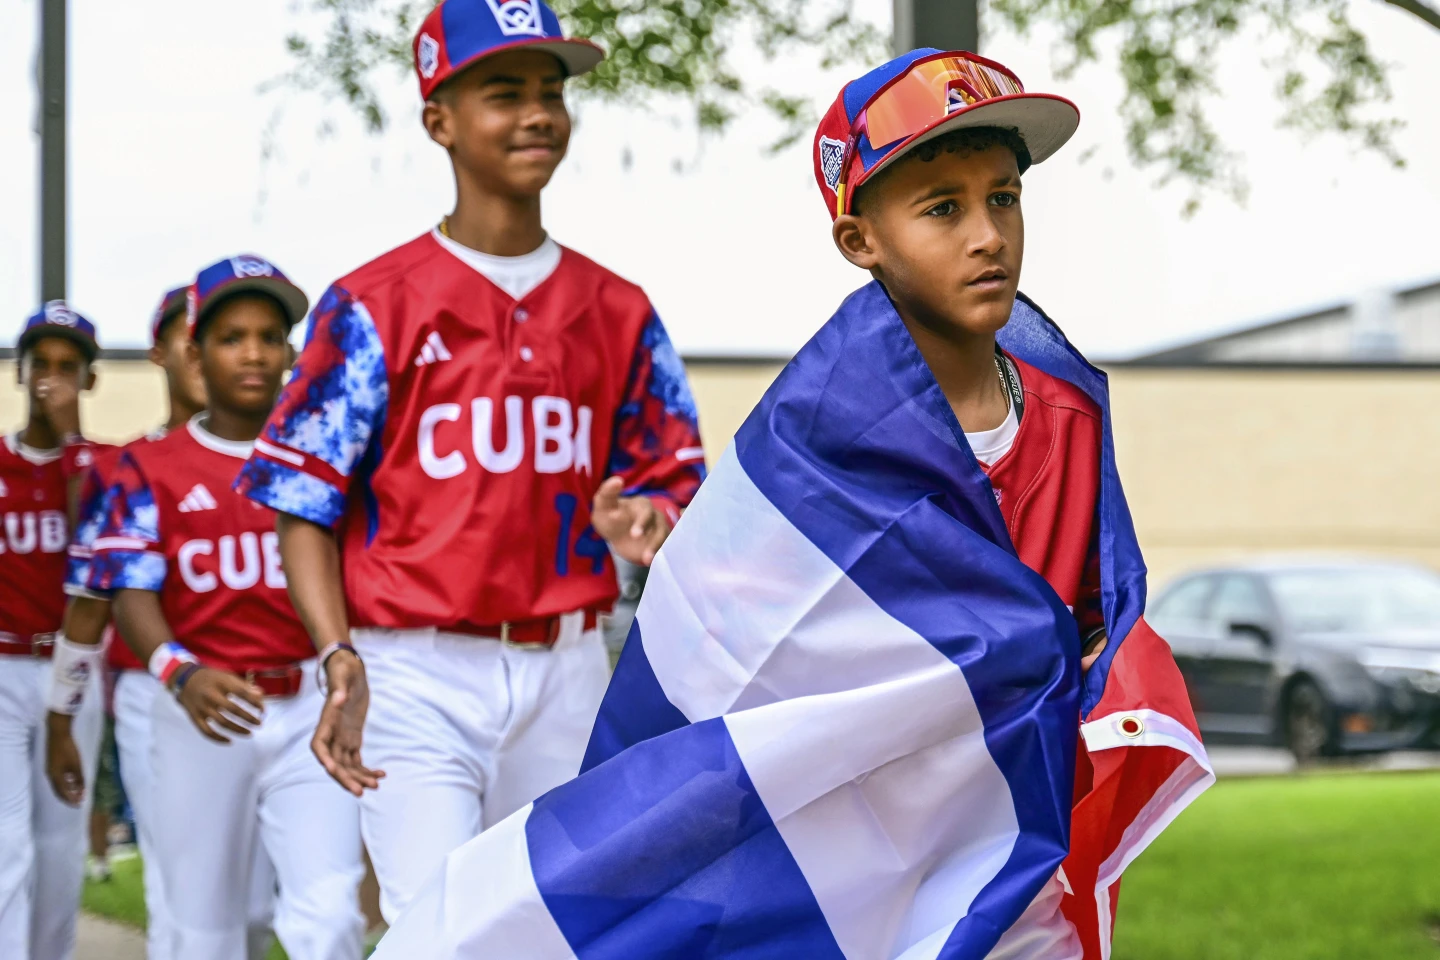 Cuba is in the Little League World Series for the first time. It’ll debut vs Japan on Wednesday